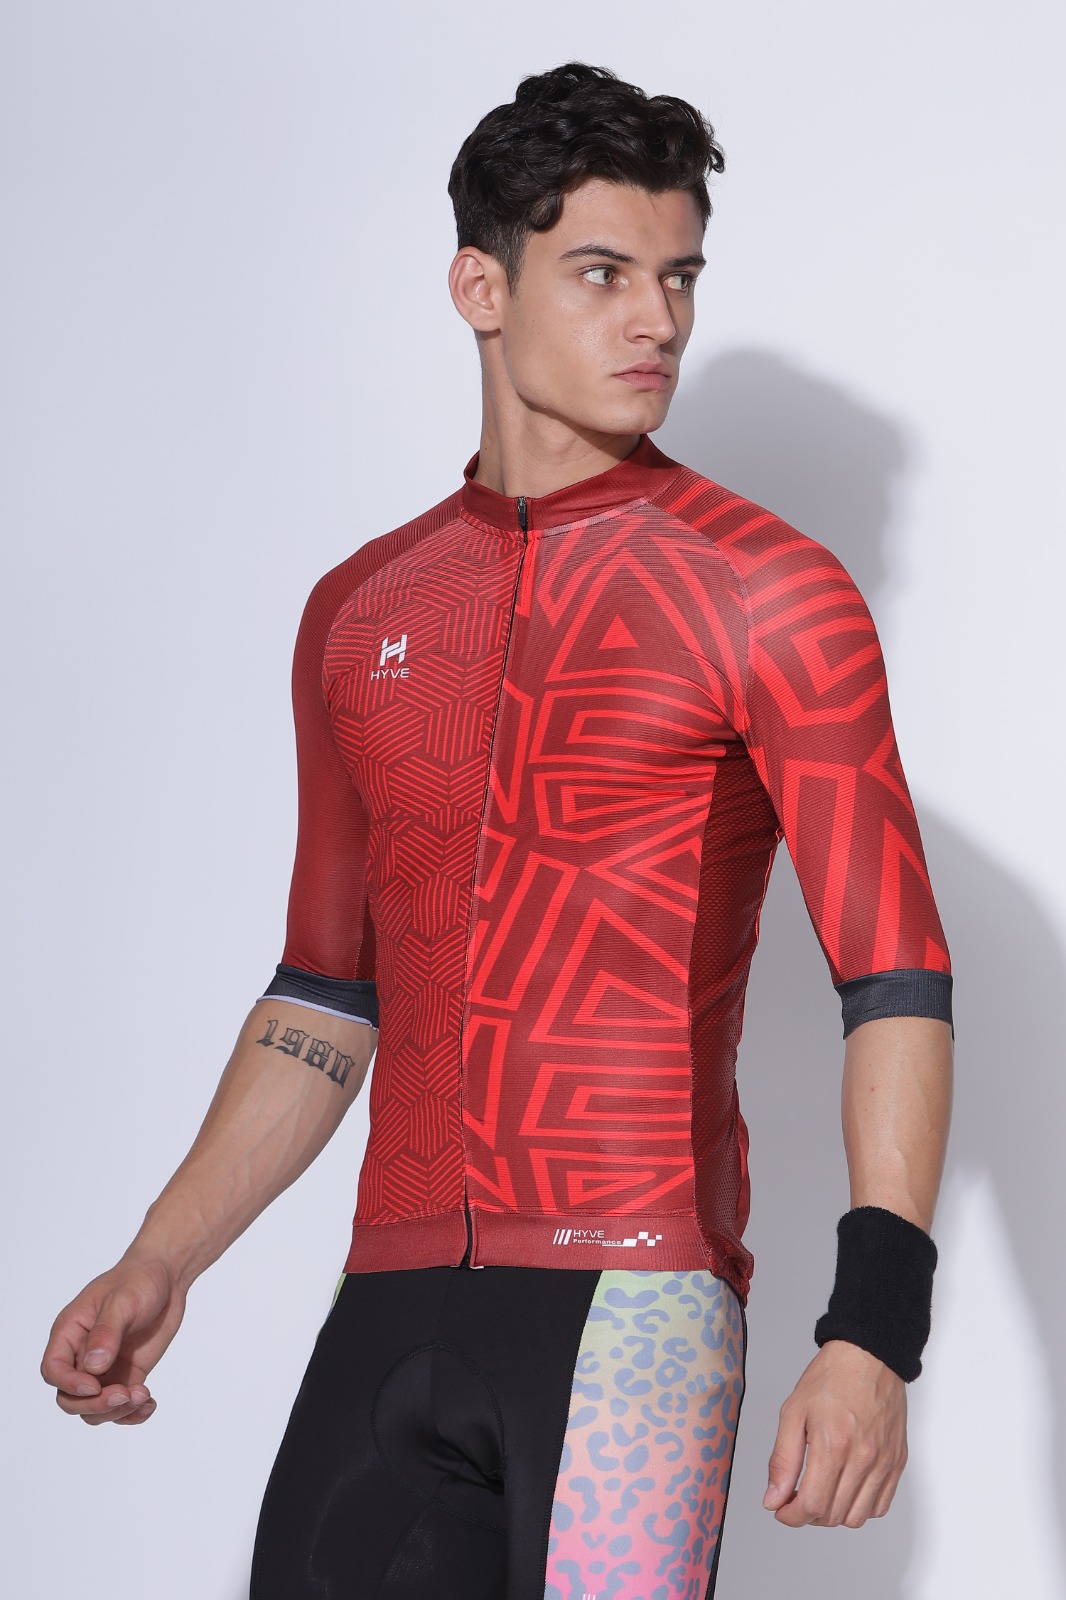 Hyve Bandidas Red Custom Racefit Cycling Jersey for Men